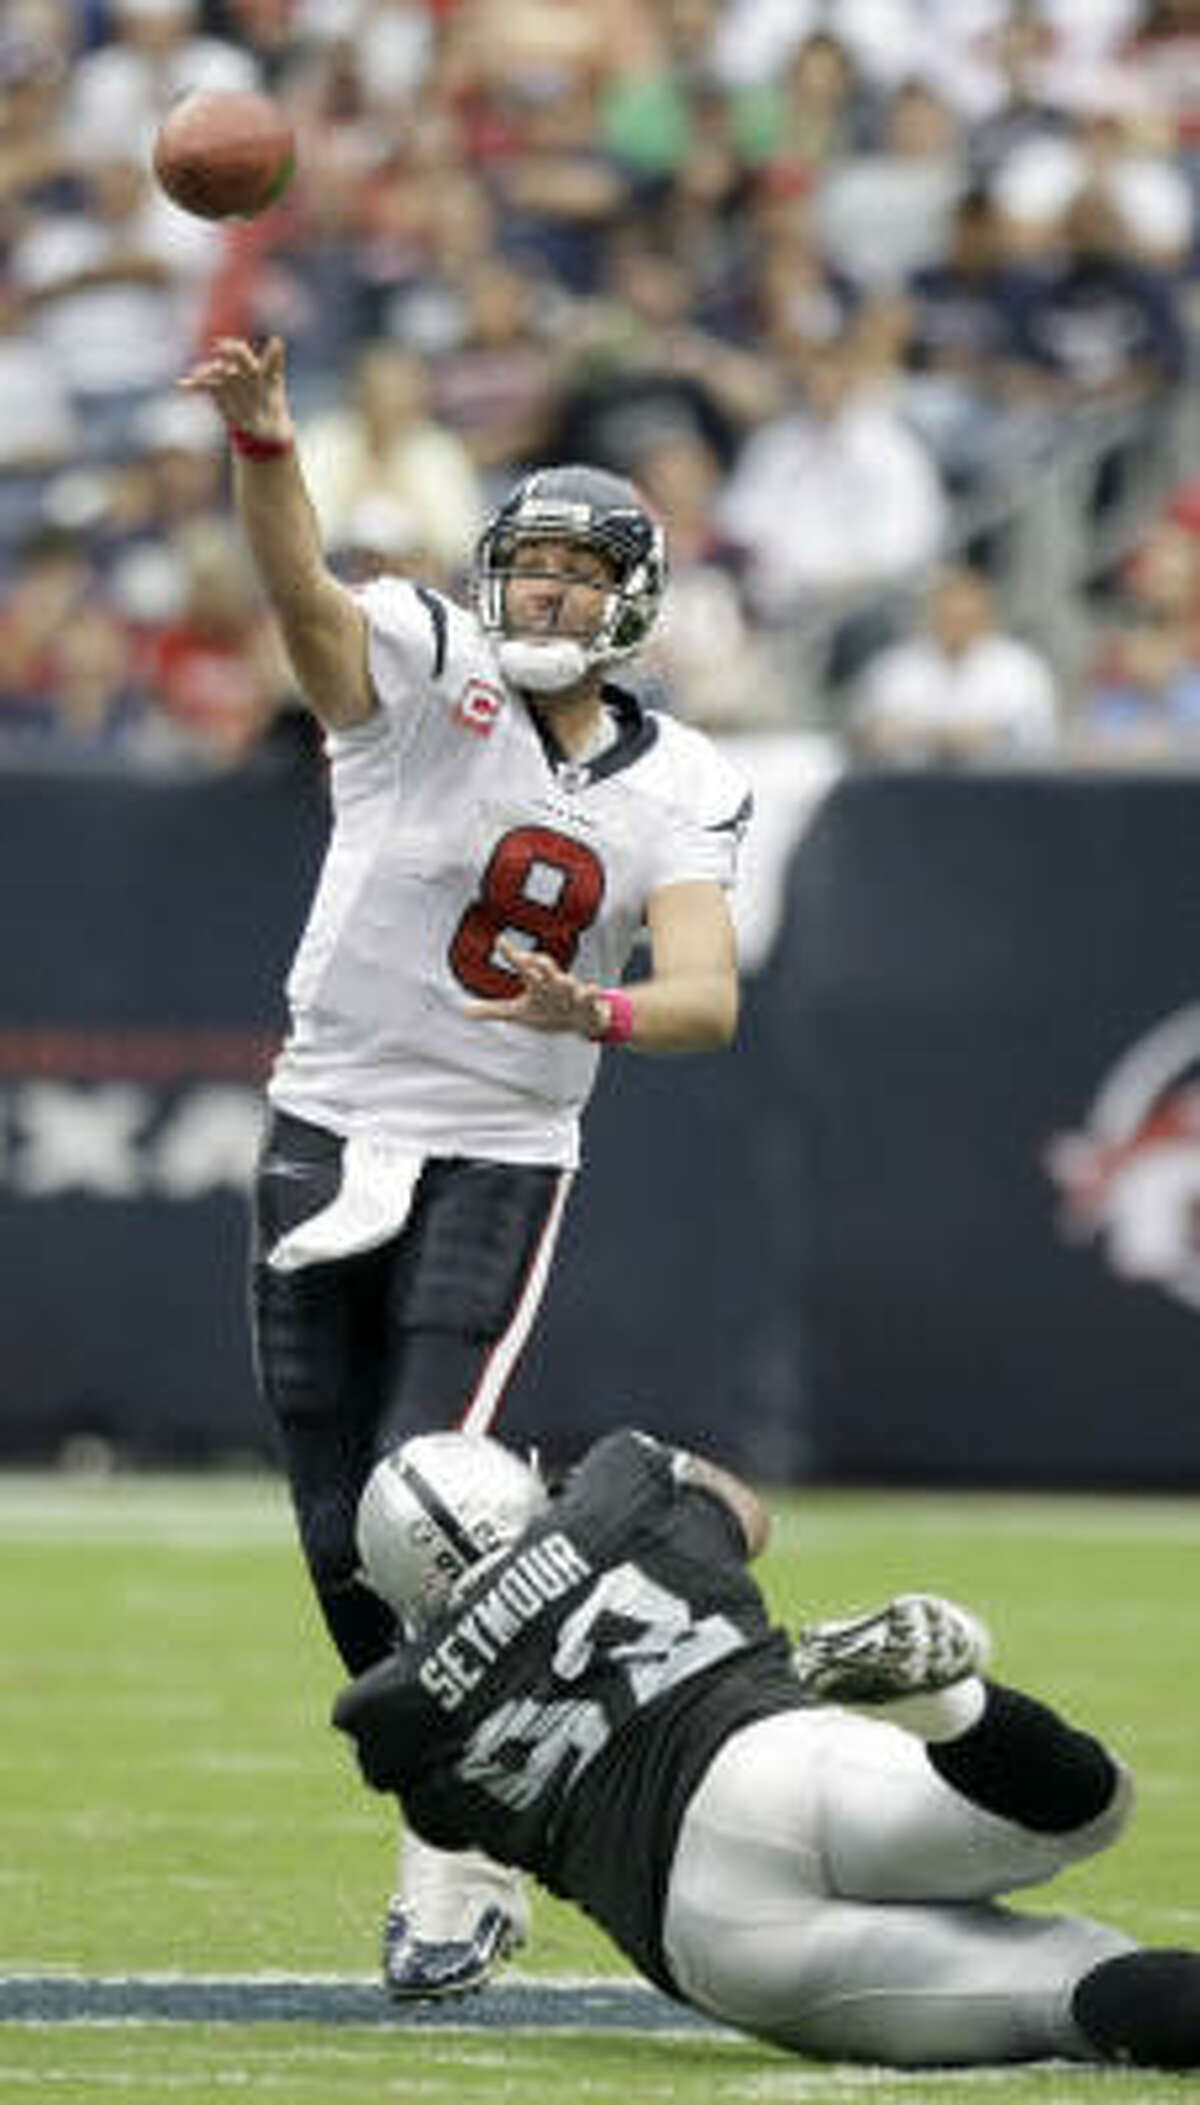 FALLING: Quarterback Matt Schaub After throwing for 204 yards in the first half, Schaub had only 20 in the second half against the Raiders. His problems seemed to start when he threw an interception in the end zone before the end of the first half.